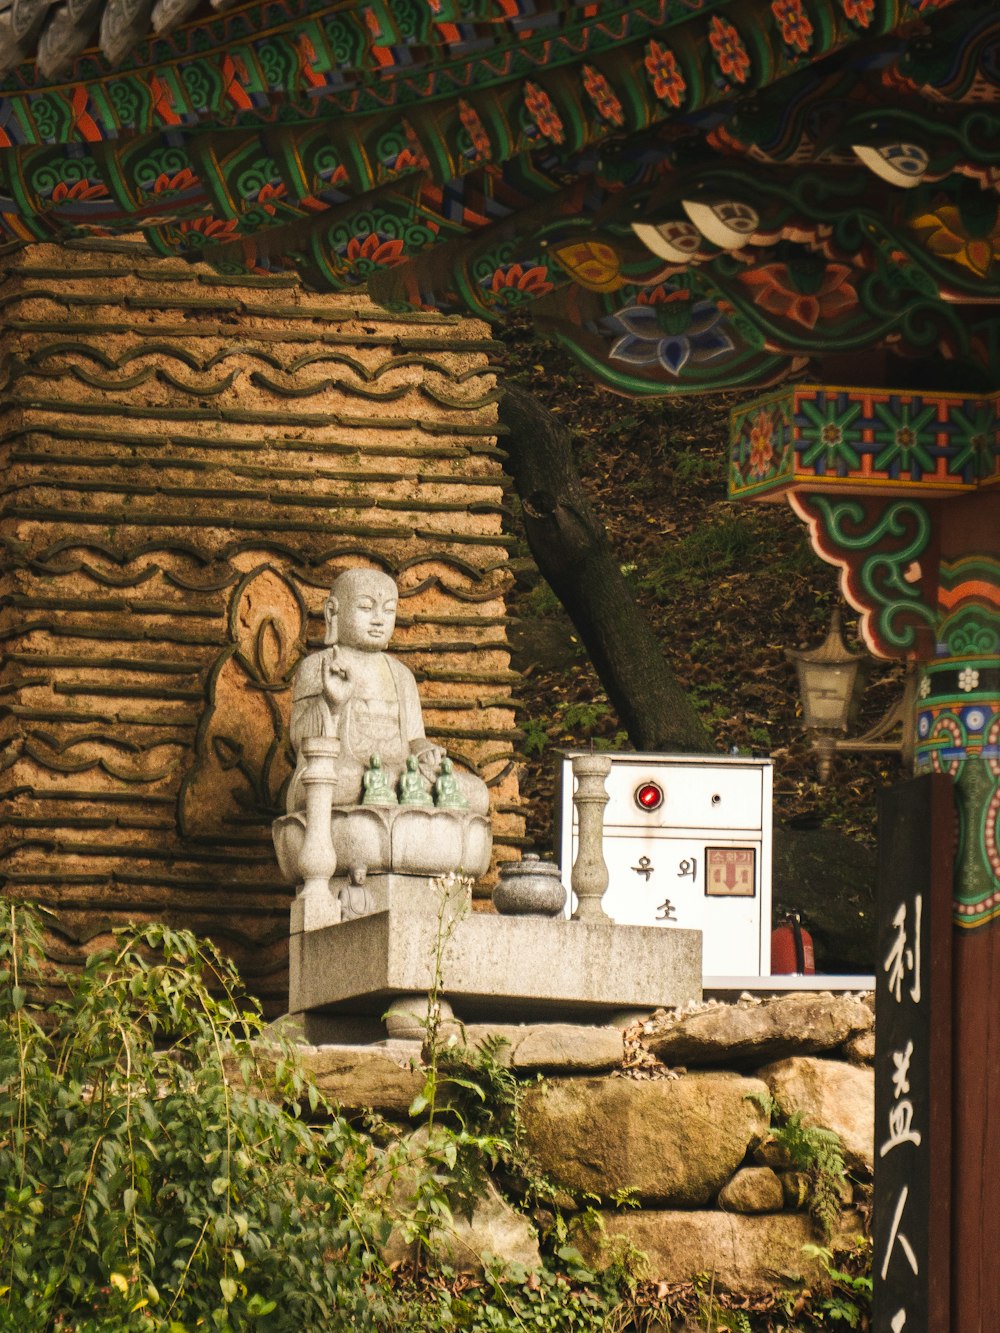 a statue of a buddha sitting on top of a stone bench